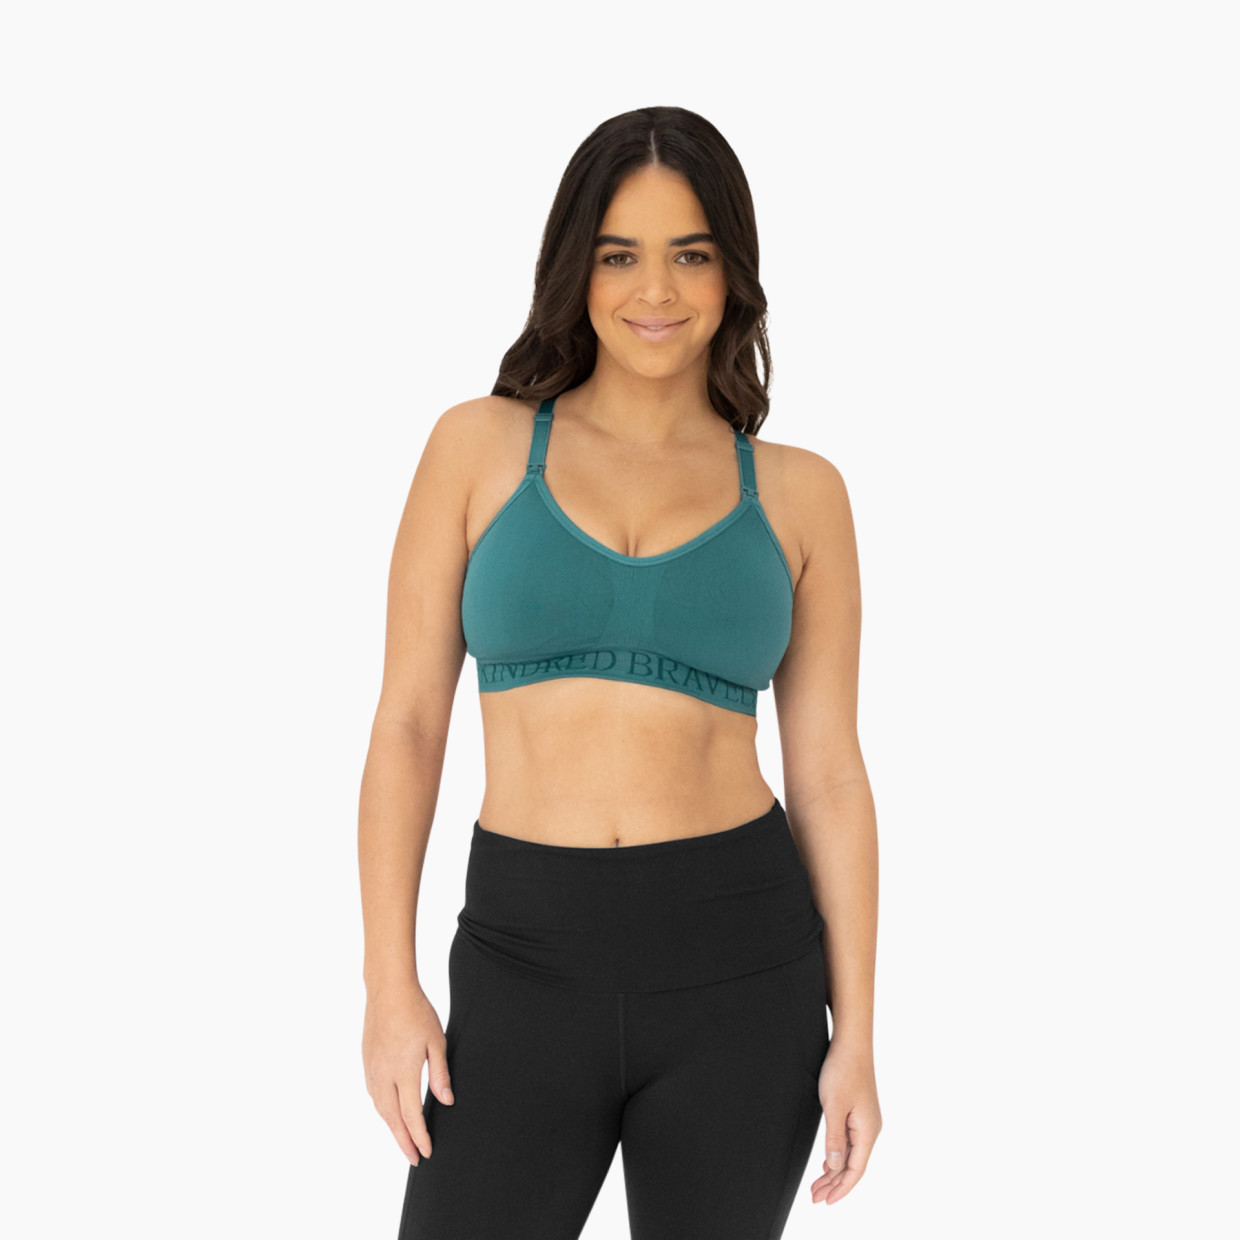 Kindred Bravely Sublime Hands-Free Pumping & Nursing Sports Bra - Teal, Small.